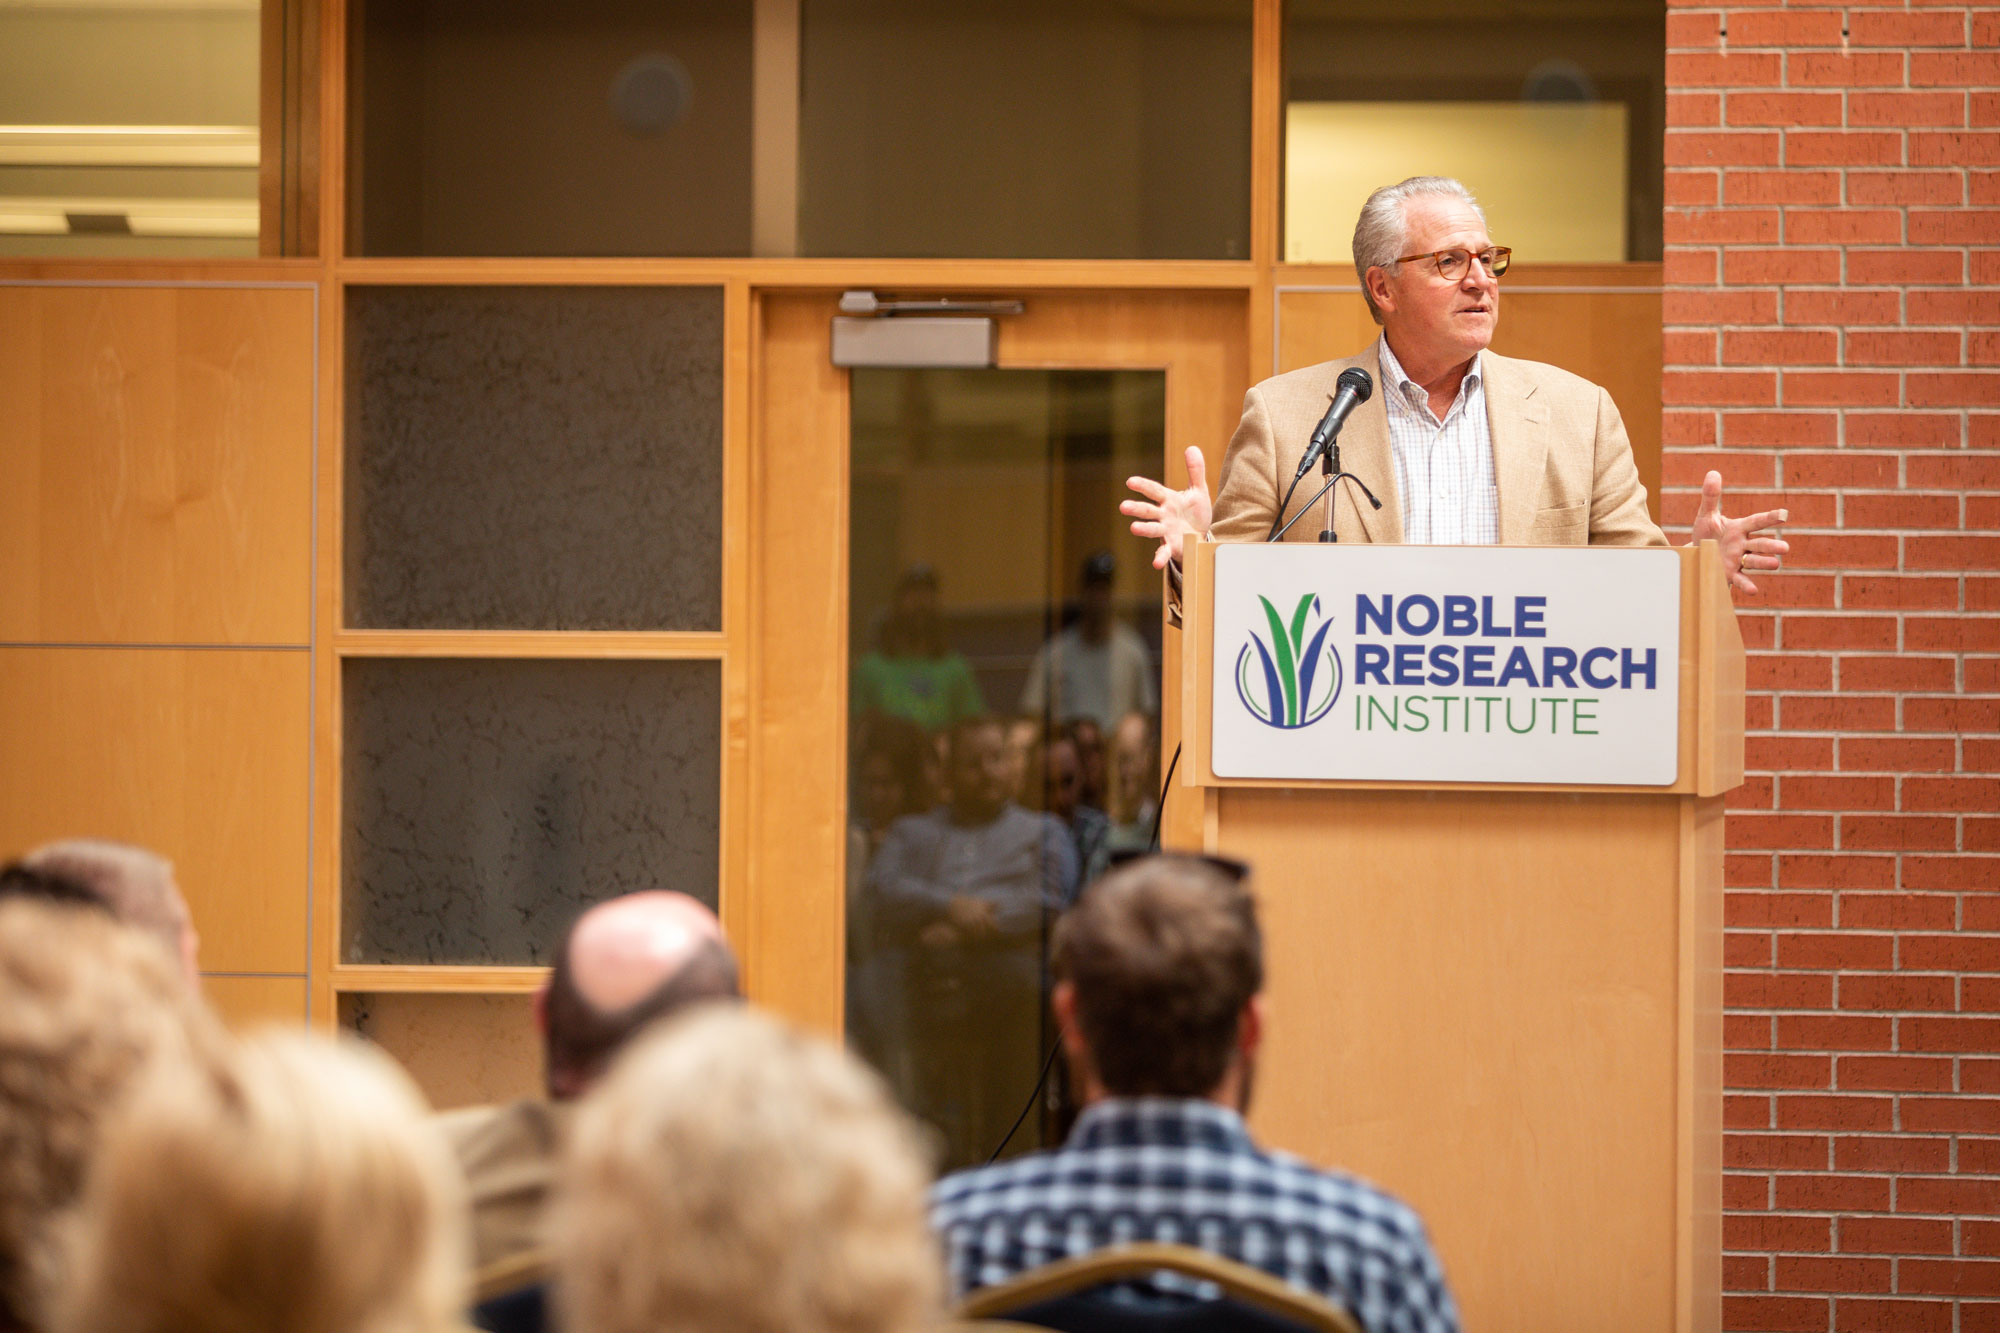 Bill Buckner announces his plans to retire as president and CEO of the Noble Research Institute during an employee meeting in Ardmore, Oklahoma, on Sept. 18, 2018.